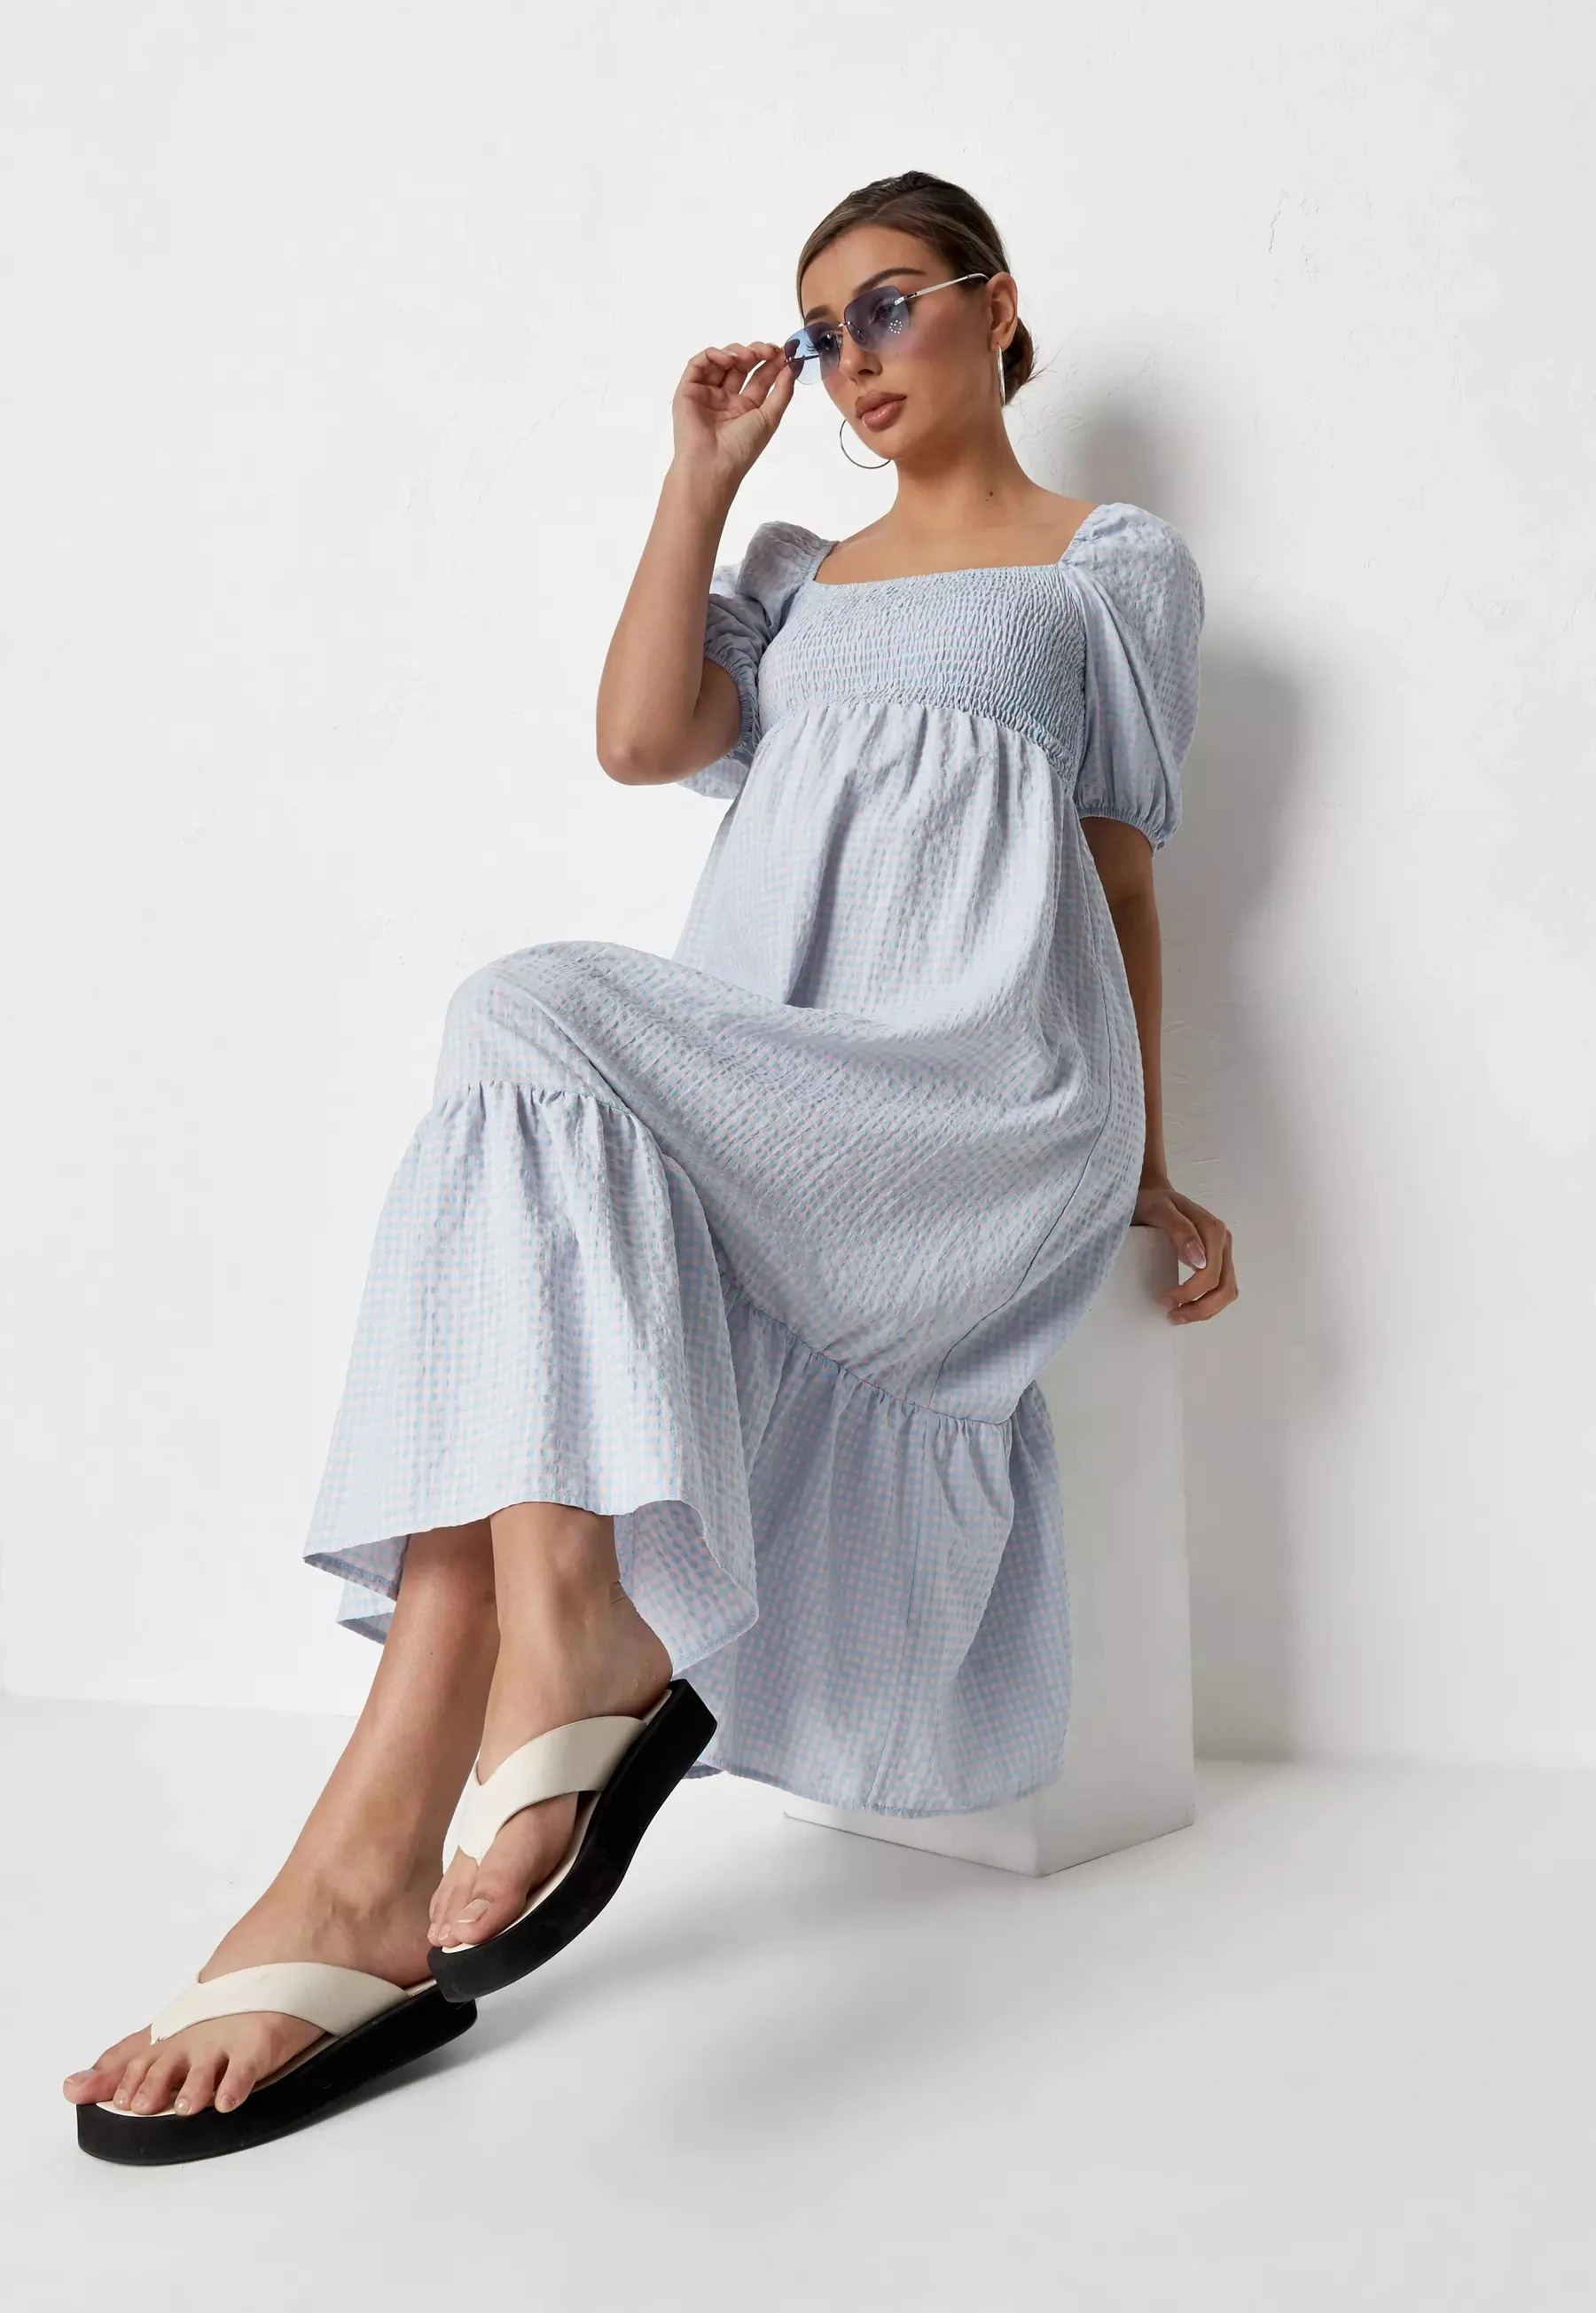 2022 Summer Plain Blue Gingham Pleated Shirred Women Pregnancy Maxi Long Maternity  Casual Dresses - Buy Pregnant Dress For Women,Maxi Maternity Dress,Antumn  Blue Gingham Shirred Maternity Dresses Product on Alibaba.com